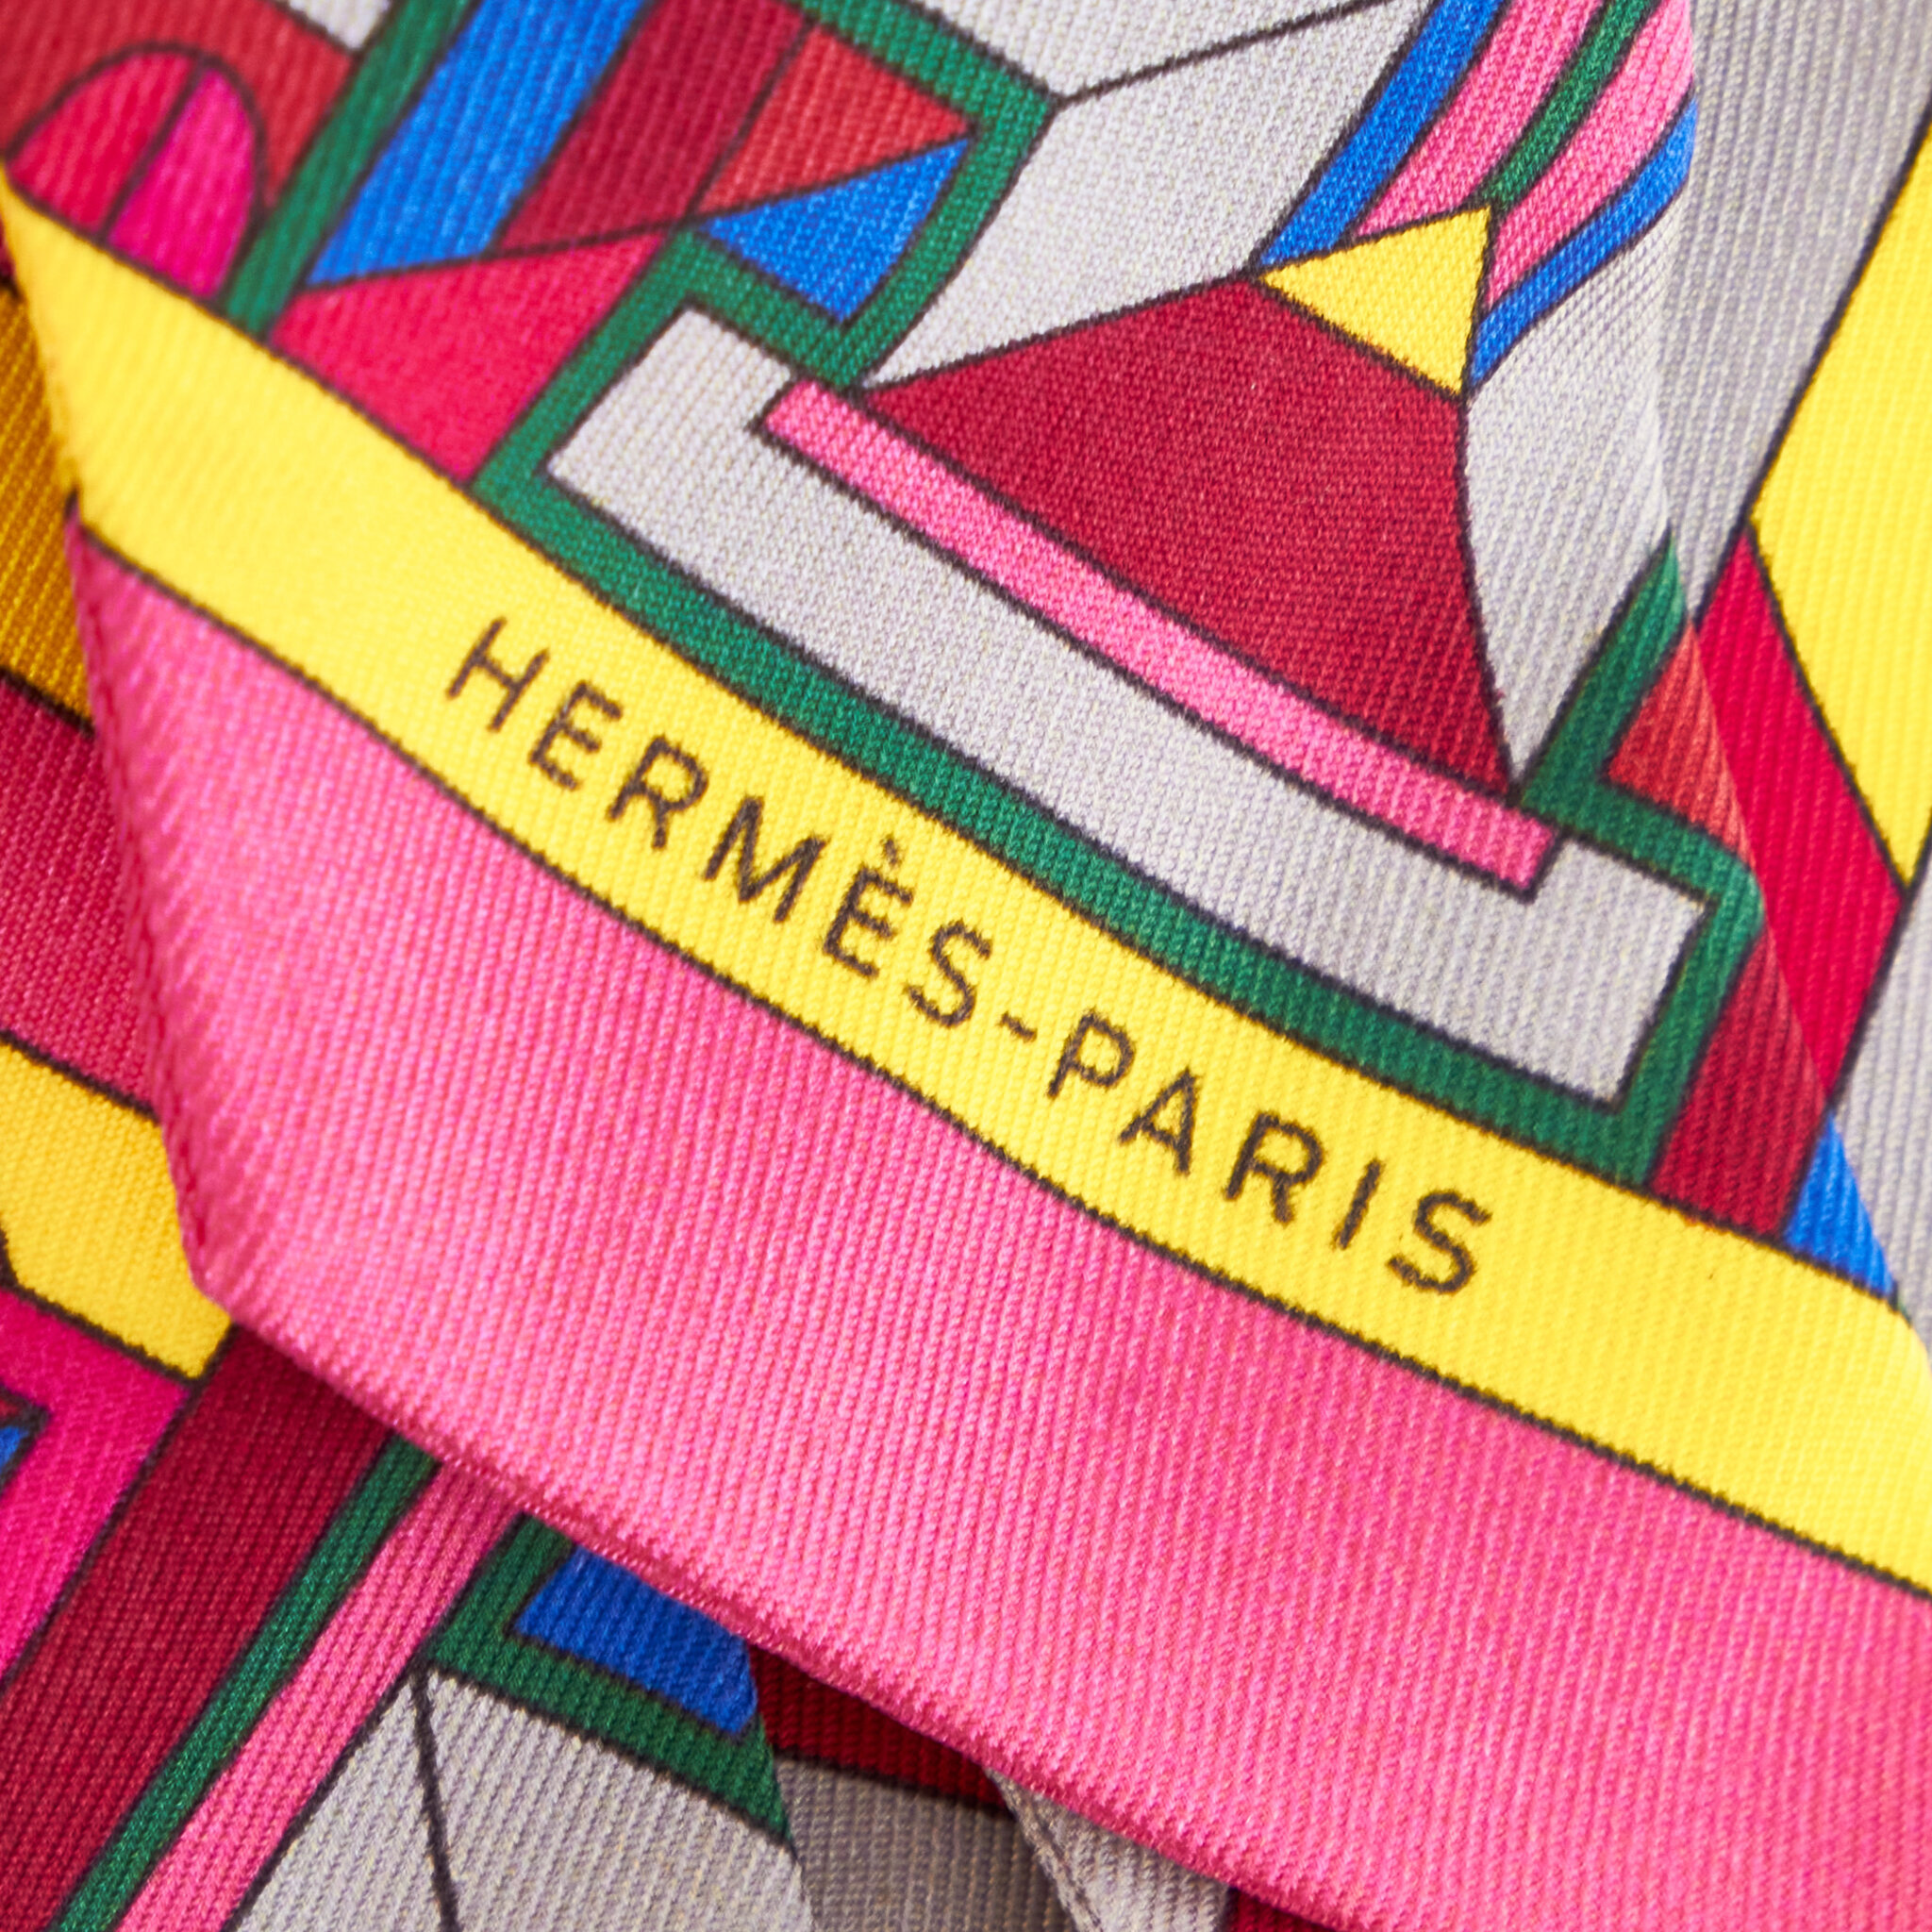 Hermes Printed Twilly Silk Scarf, ONESIZE, pink